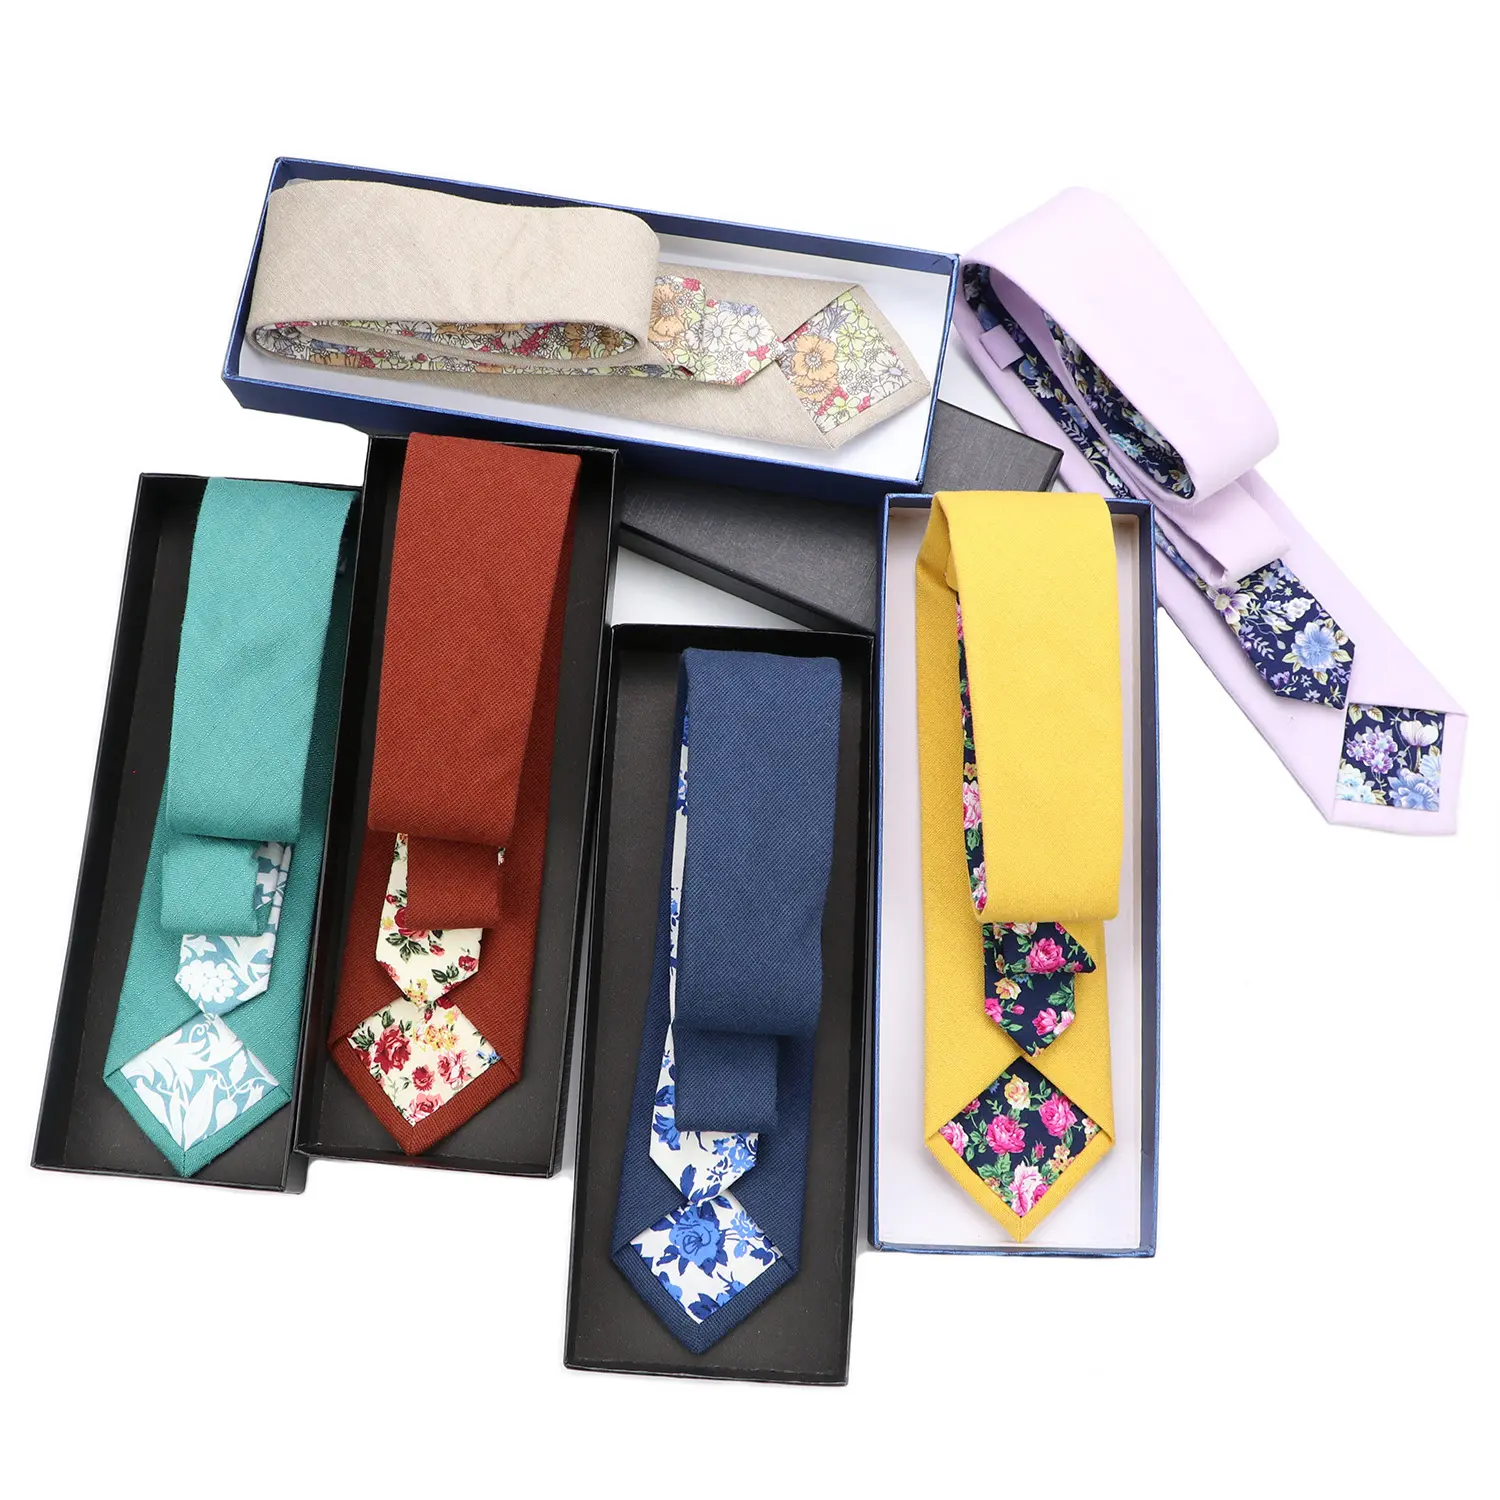 Fashion Two-sided designs Wedding Tie For Men Fashion Plain Color With Floral Bridegroom Groomsman Necktie